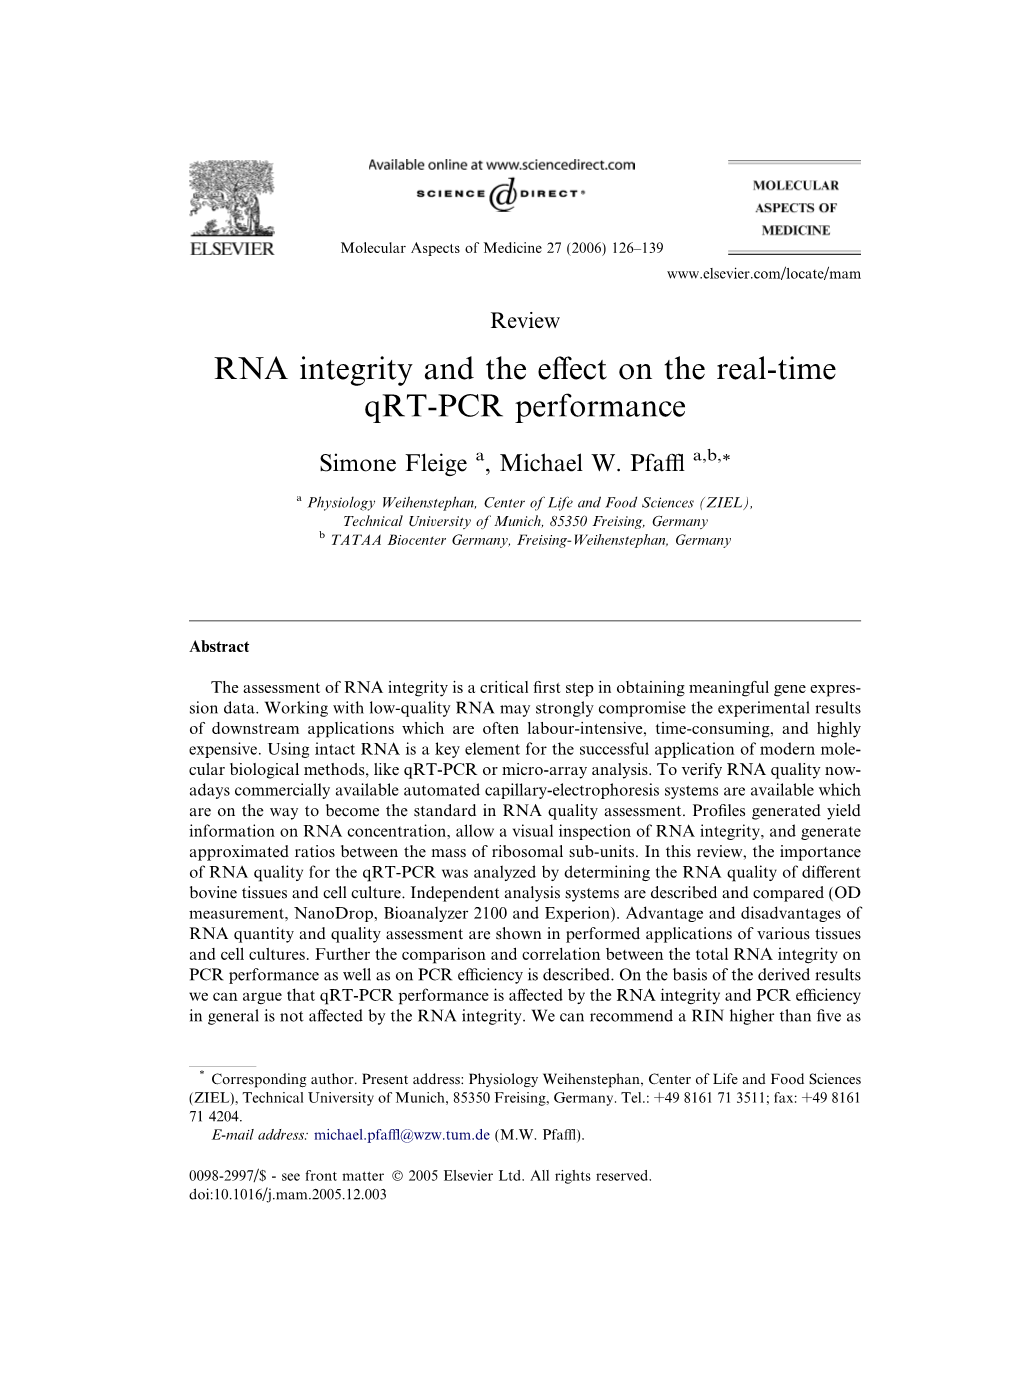 REVIEW: RNA Integrity and the Effect on the Real-Time Qrt-PCR Performance